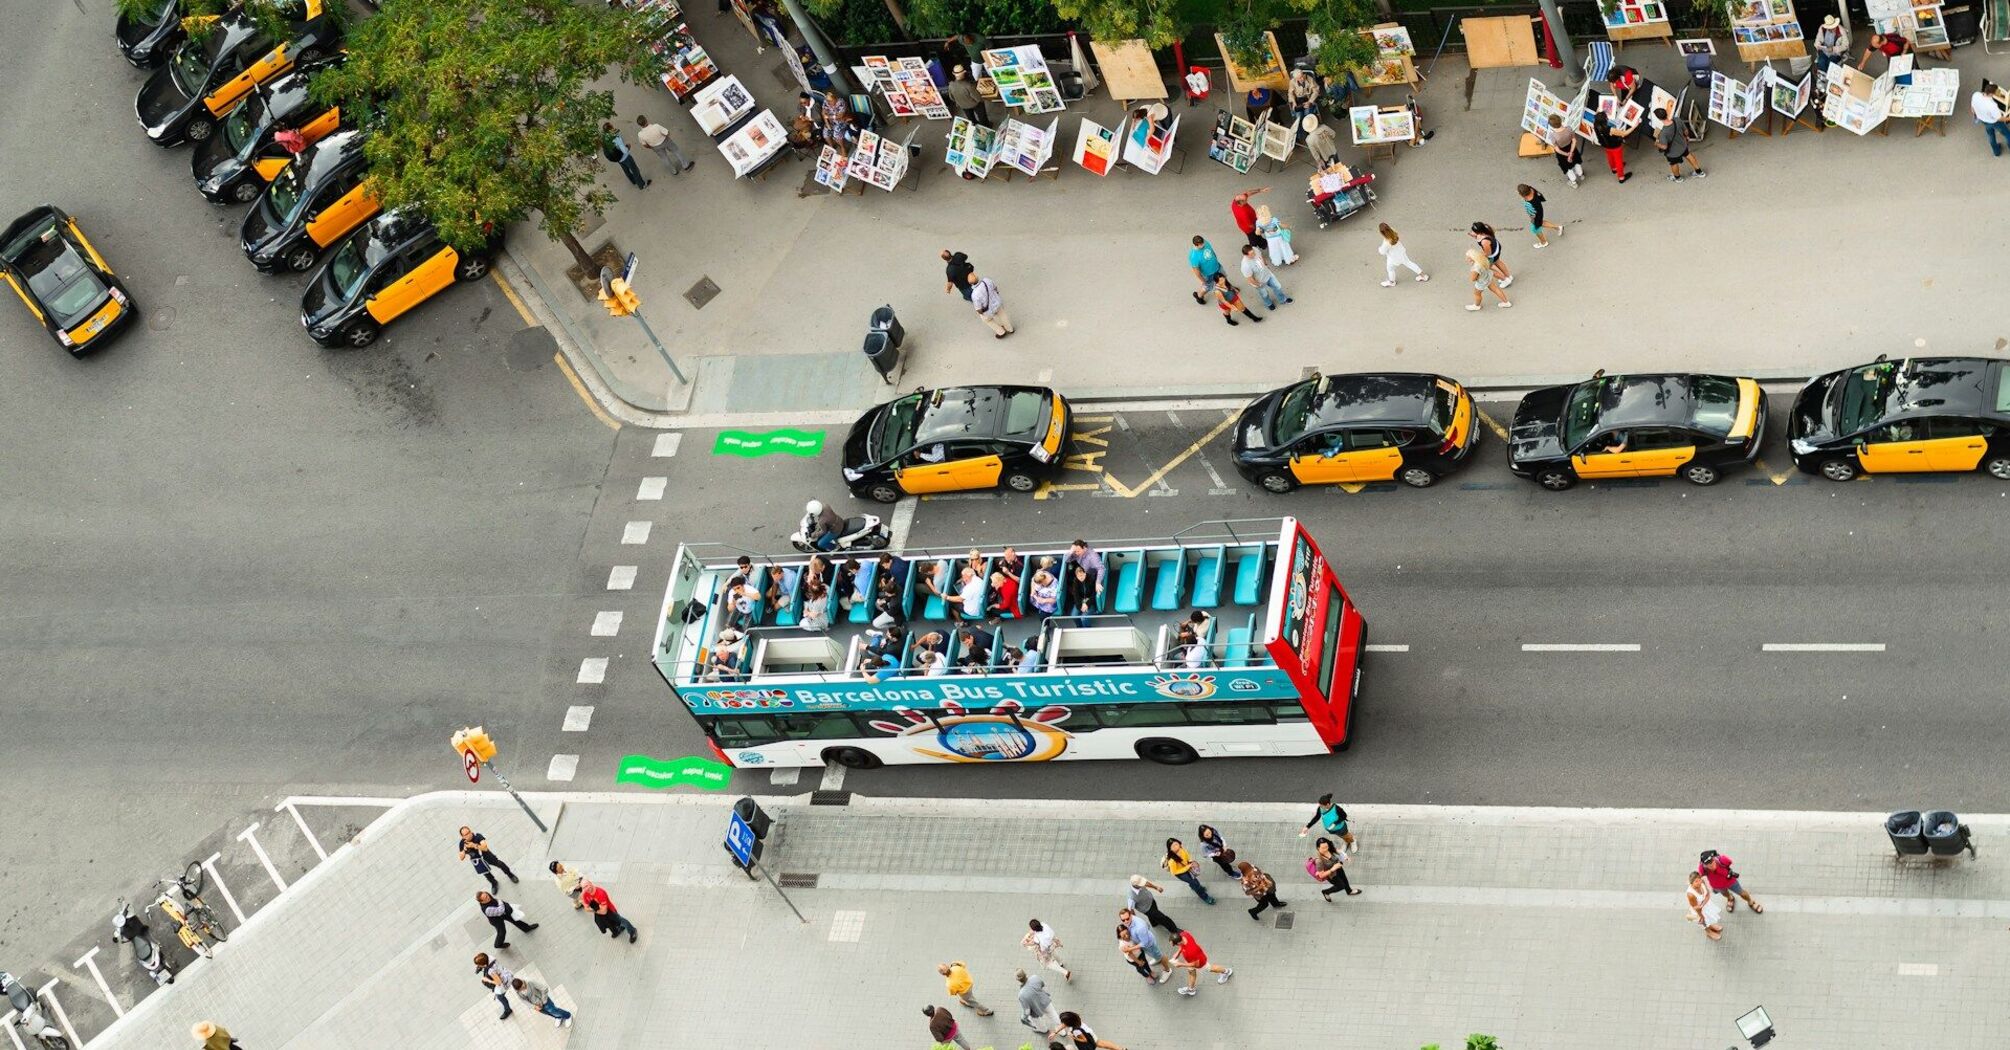 Aerial view of a busy street in Barcelona with taxis, a tourist bus, and street vendors